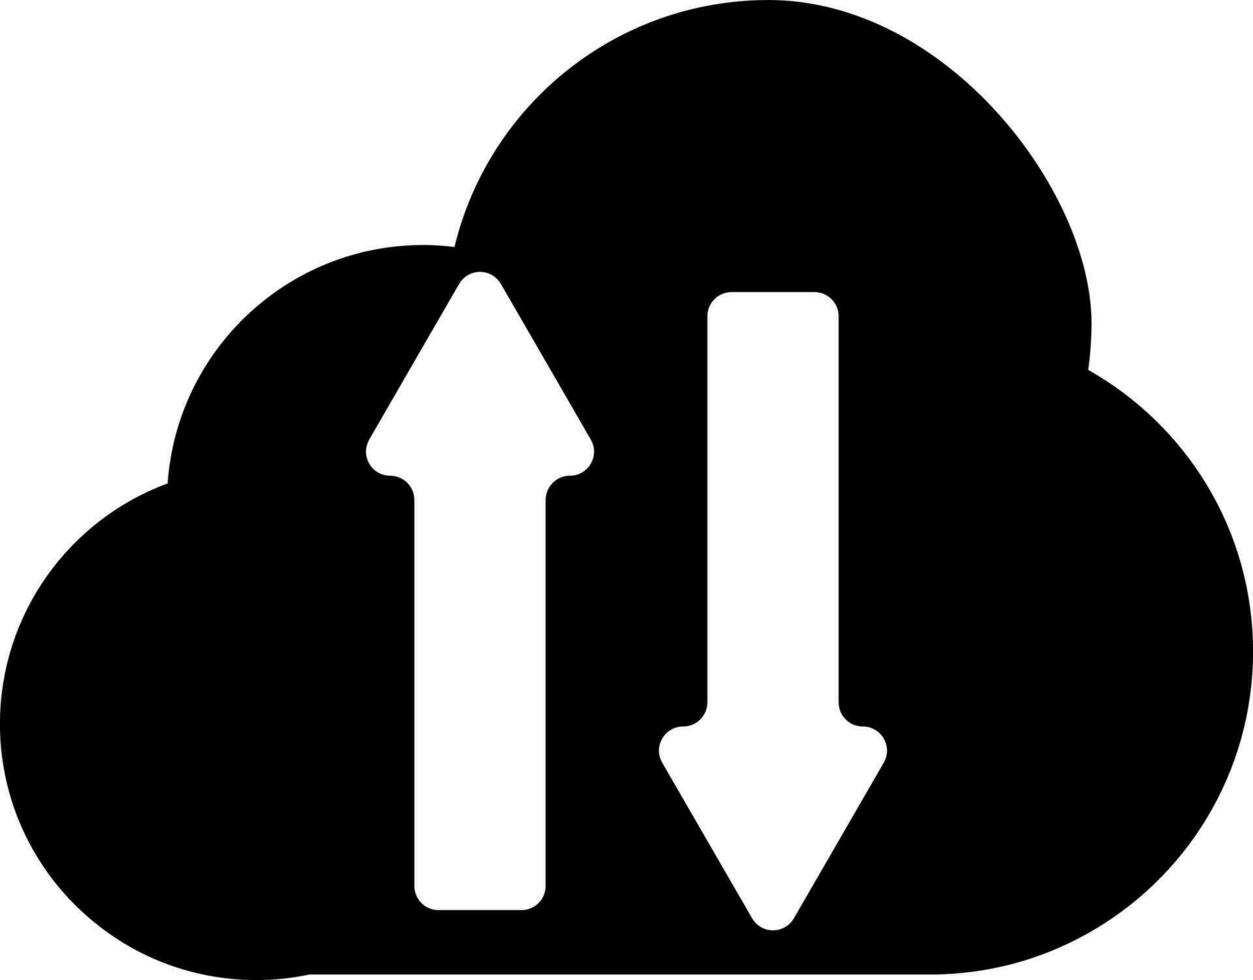 Cloud data storage icon in black and white color. vector